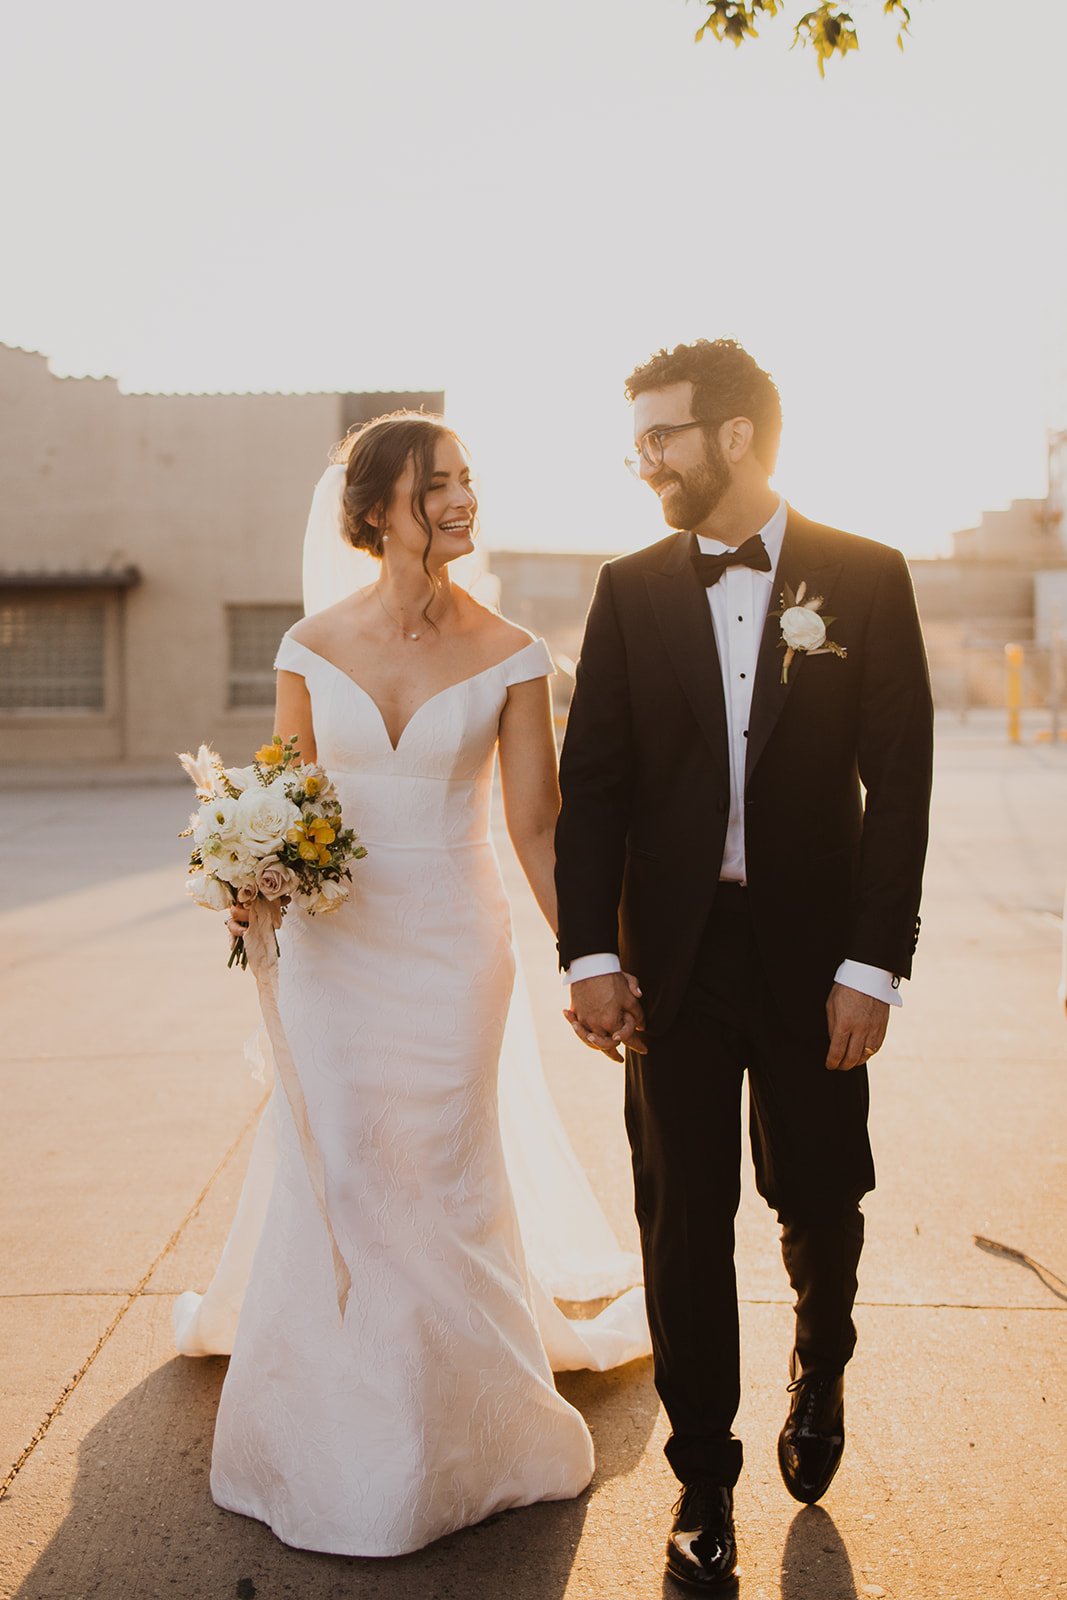  Anne Barge Anne Barge Bridal Anne Barge Frankie fitted gown off the shoulder wedding gown Denver wedding Colorado wedding yellow florals fall flowers dramatic veil 